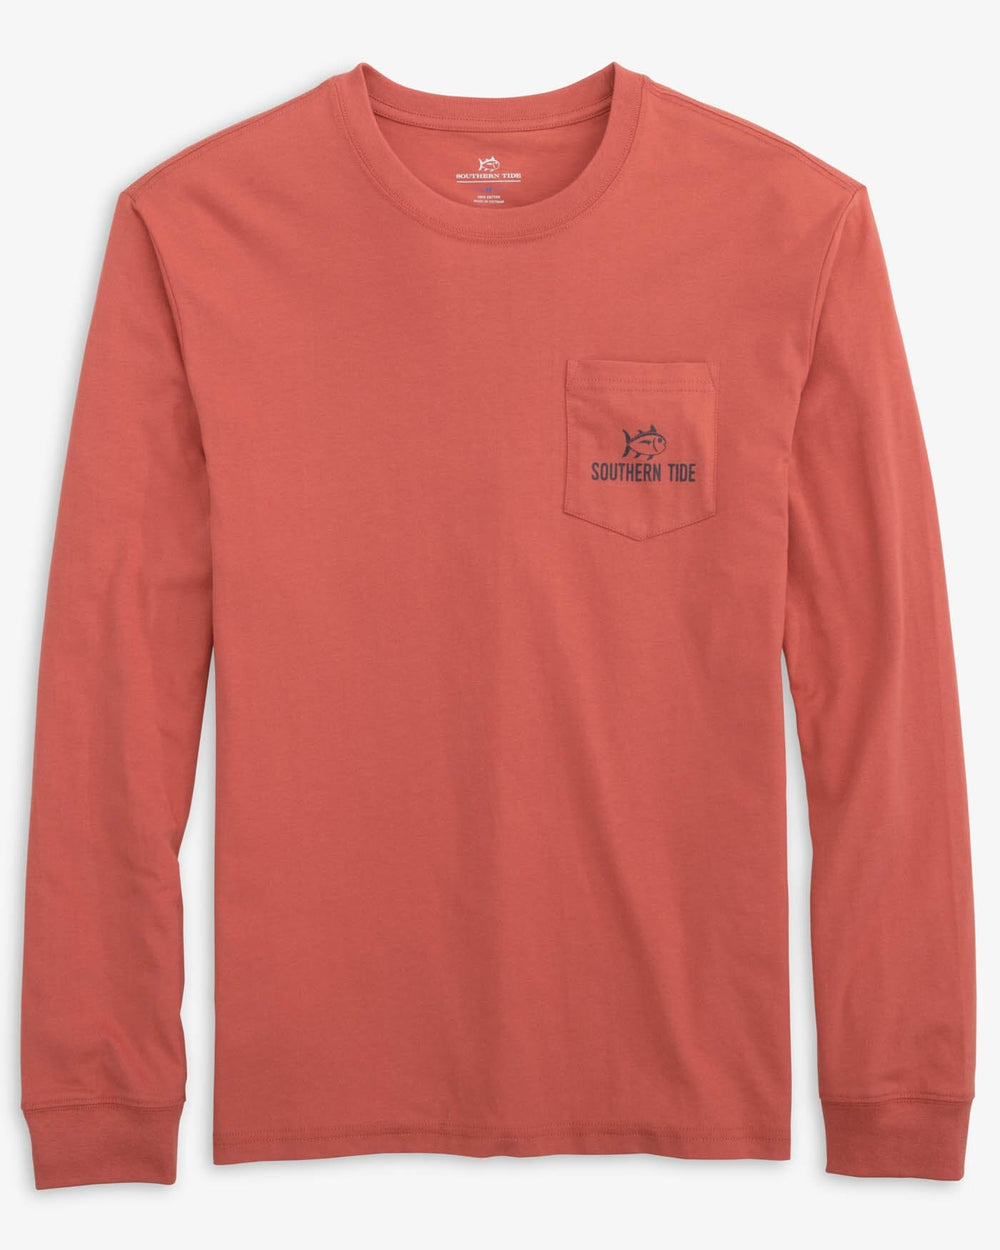 The front view of the Southern Tide Gradient Tent Long Sleeve T-Shirt by Southern Tide - Dusty Coral